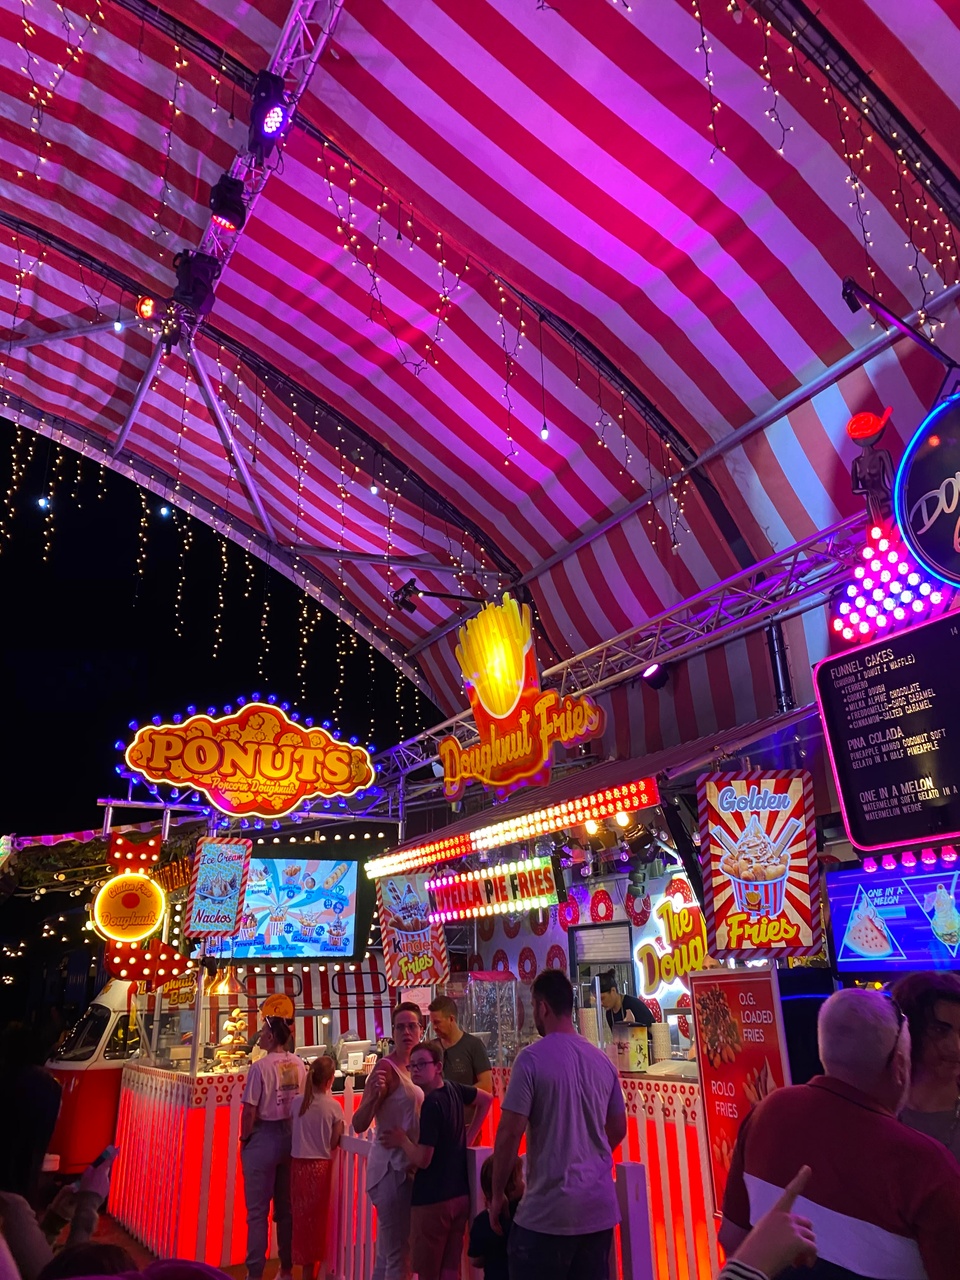 Image of people at an Eat Street dessert stall with fairy lights hanging above them